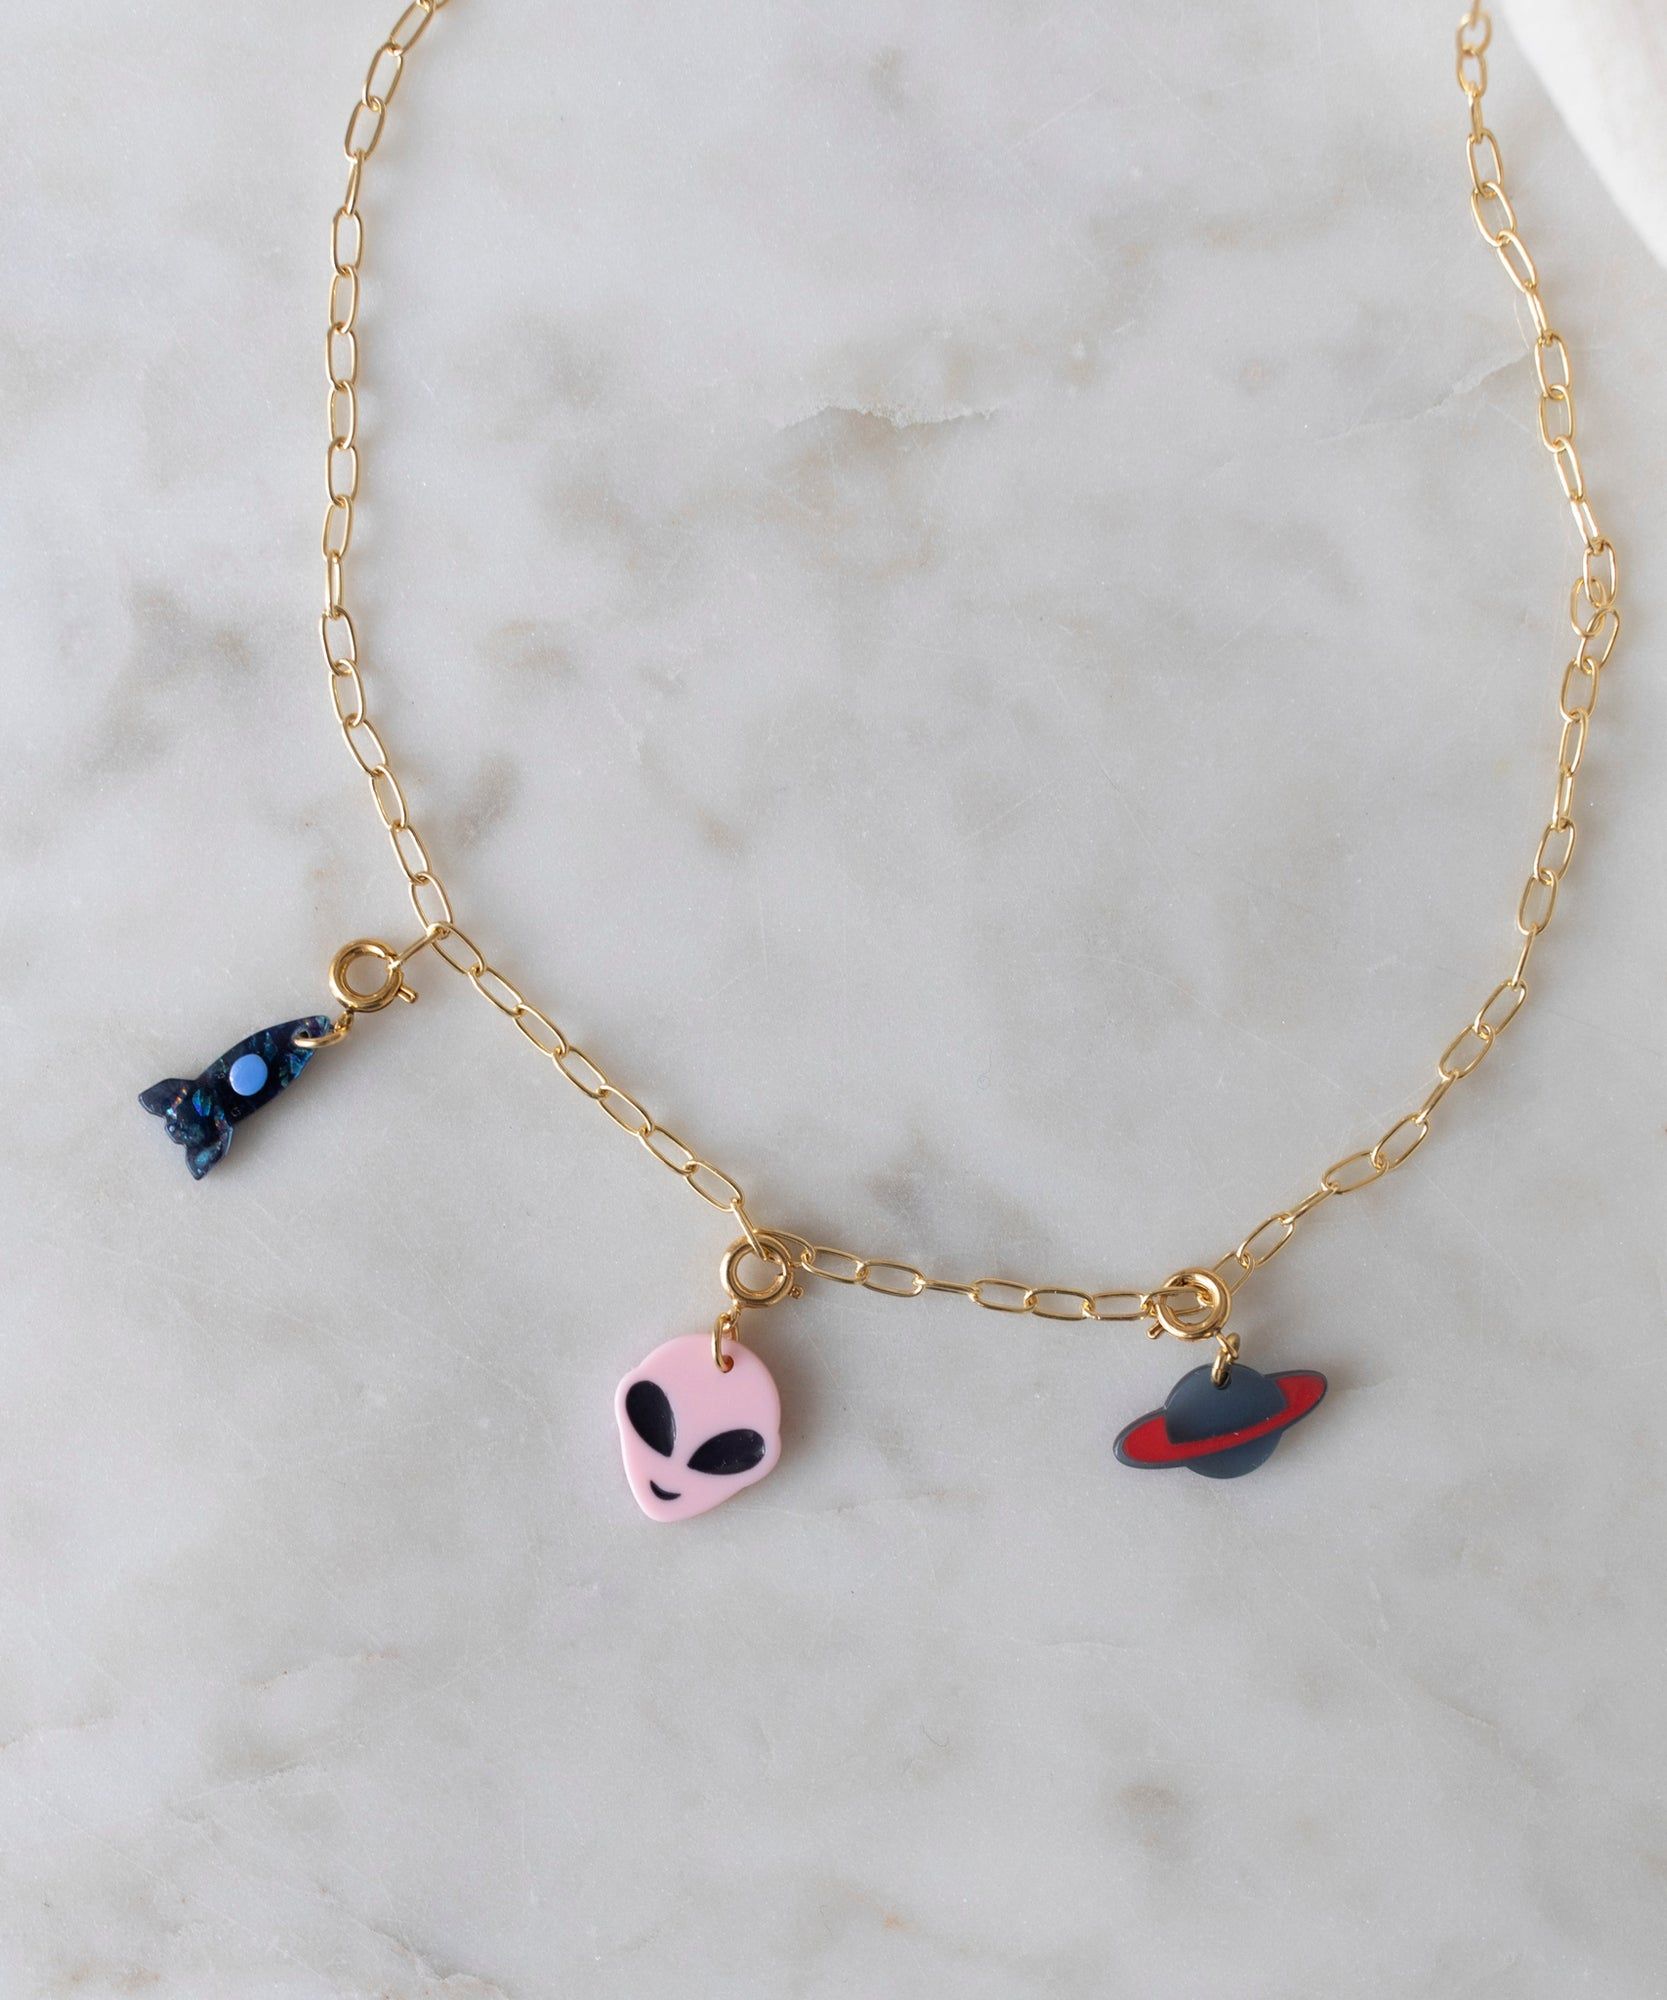 WALD Berlin Alien Dark Necklace with three colorful pendant charms: a pink alien face, a blue rocket, and a red planet, displayed on a marble surface. Made in Germany.